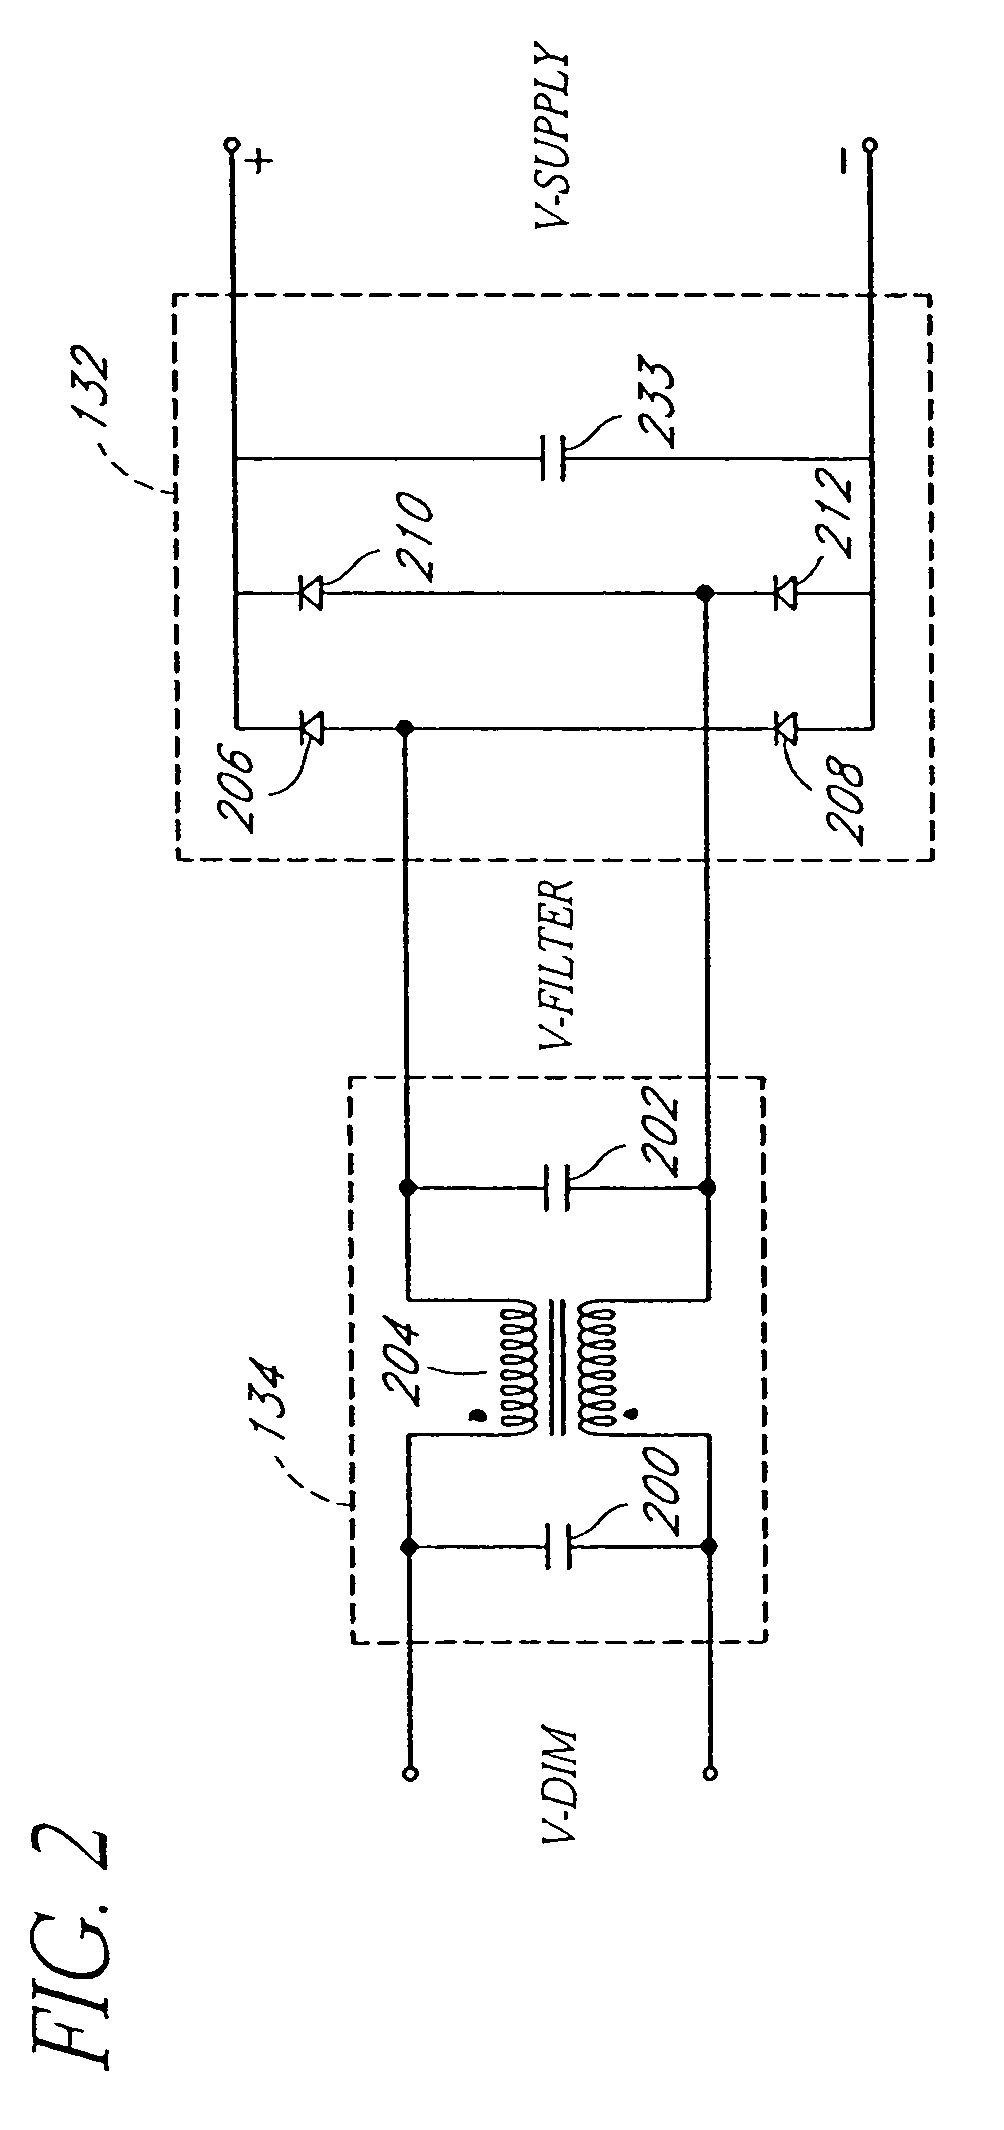 Method and apparatus for lighting a discharge lamp